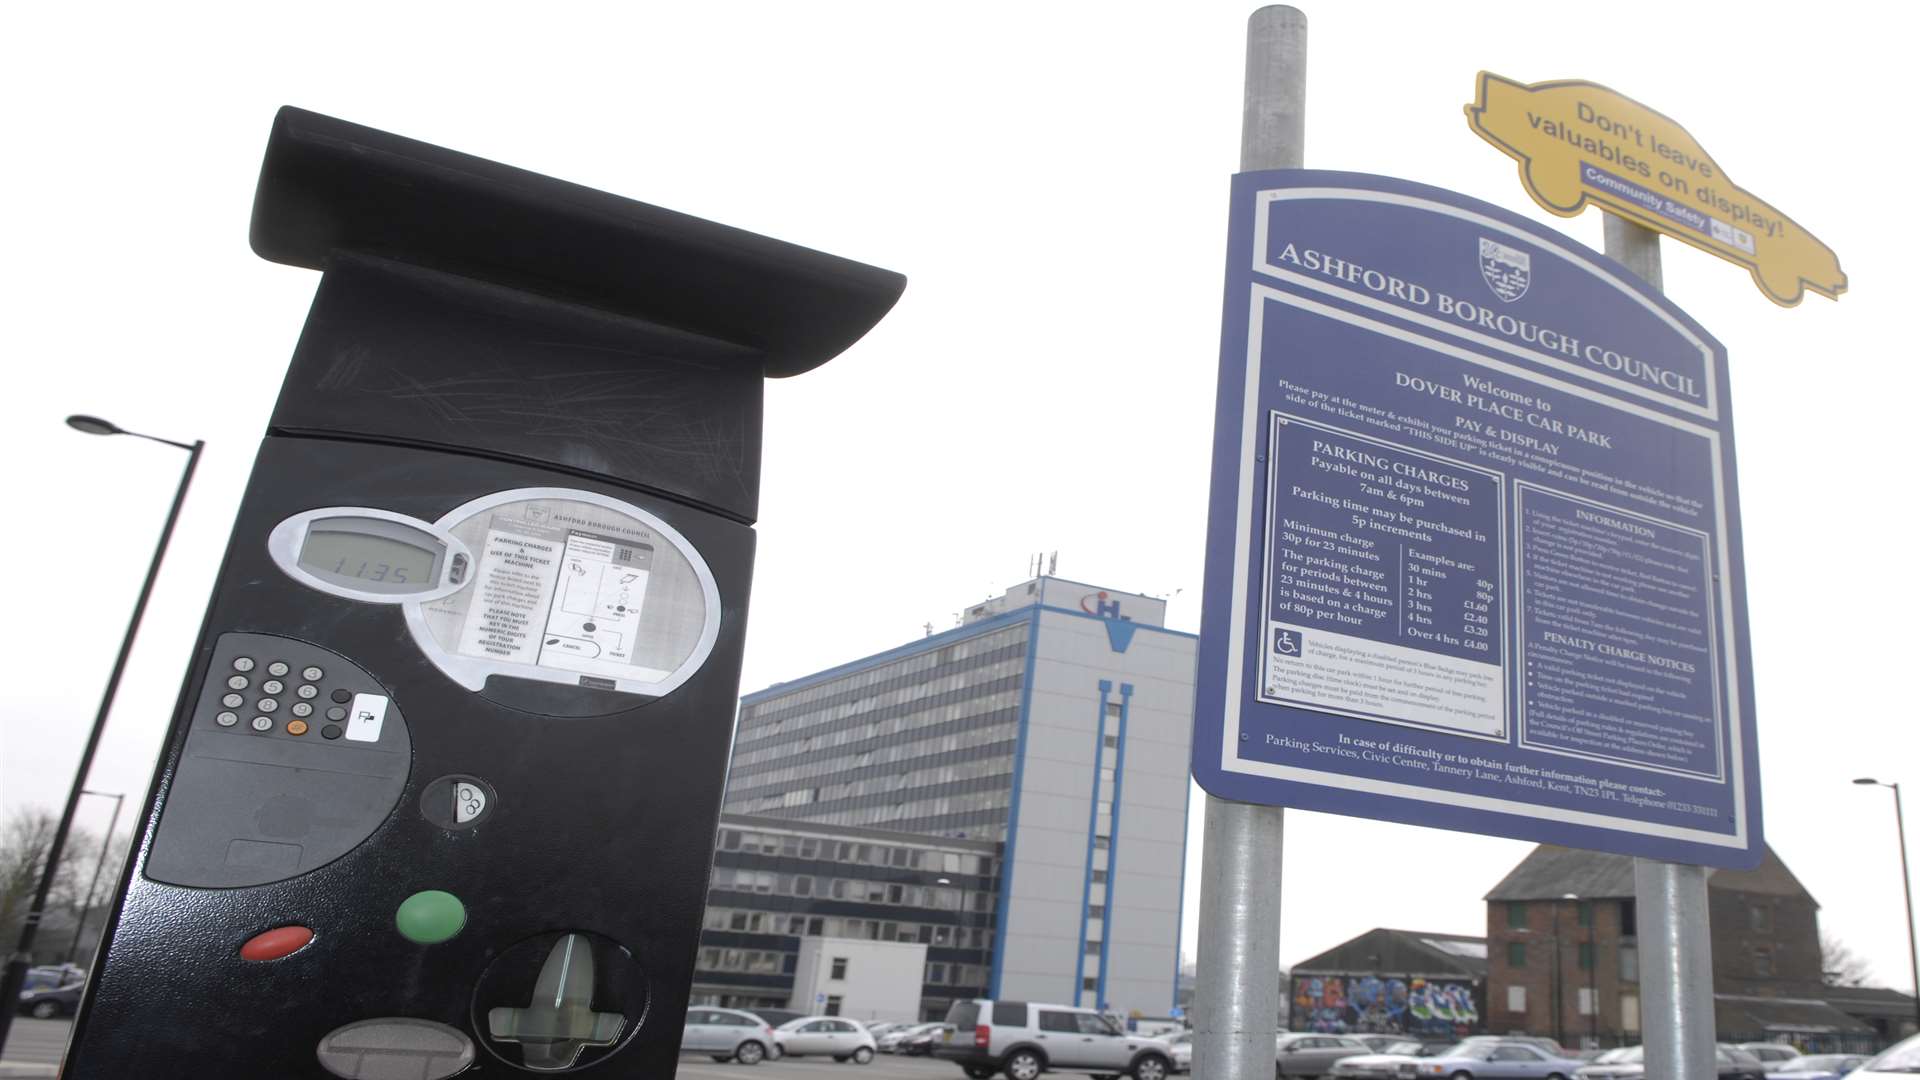 Car parks in Ashford could soon be ticketless